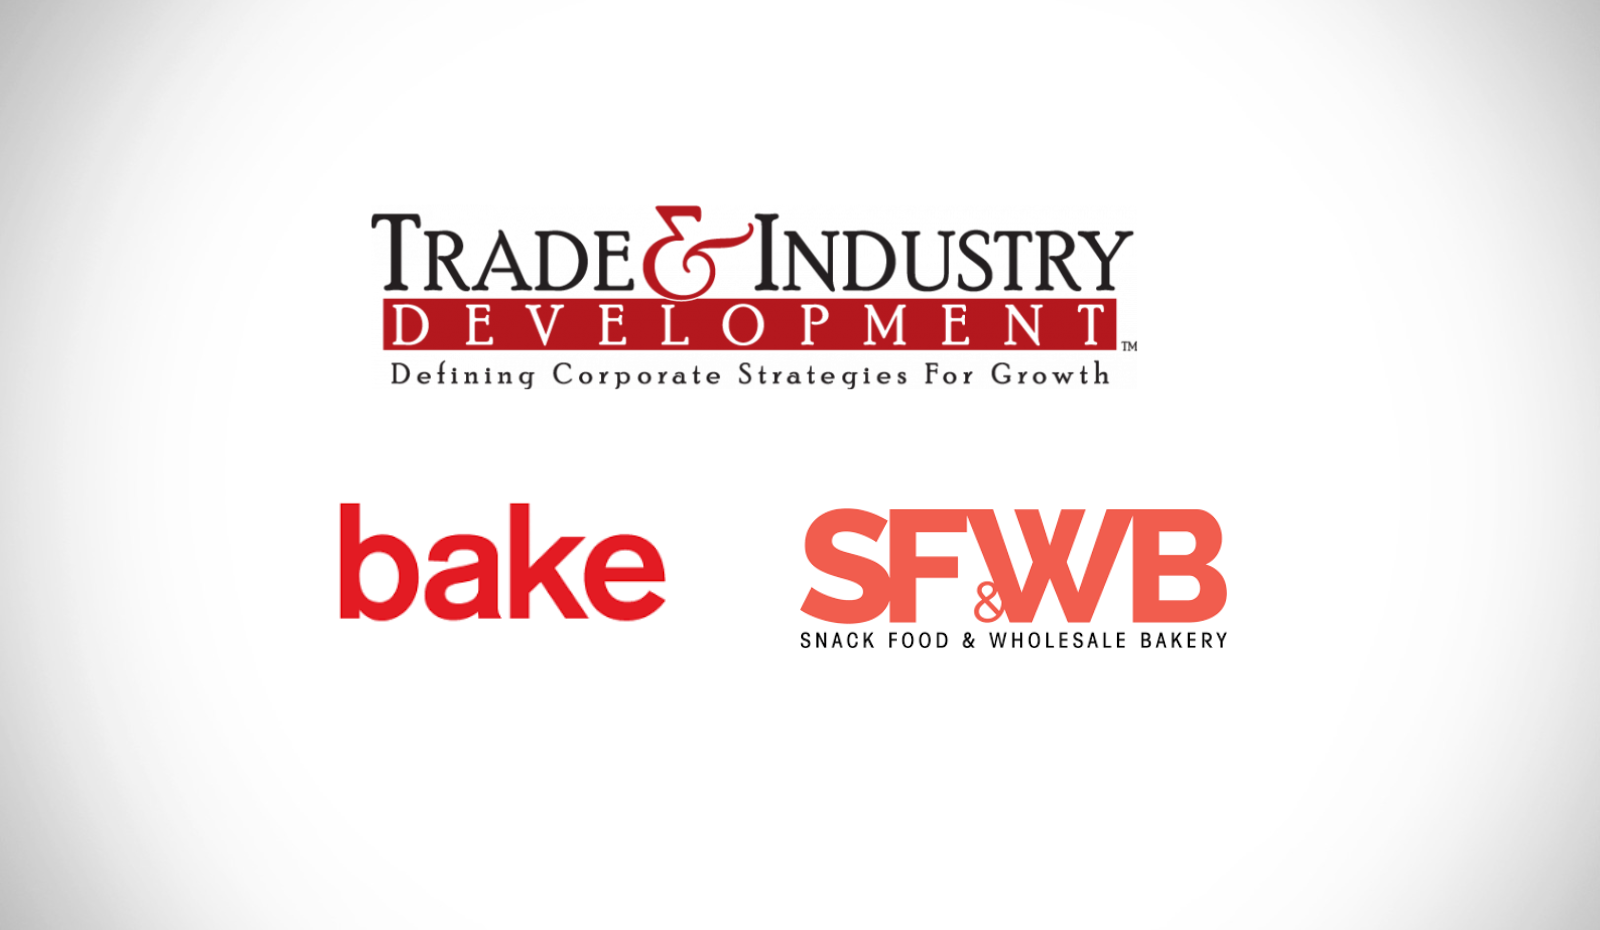 Trade & Development Magazine Covers NNMF’s $17.5M Investment in Rich Products 